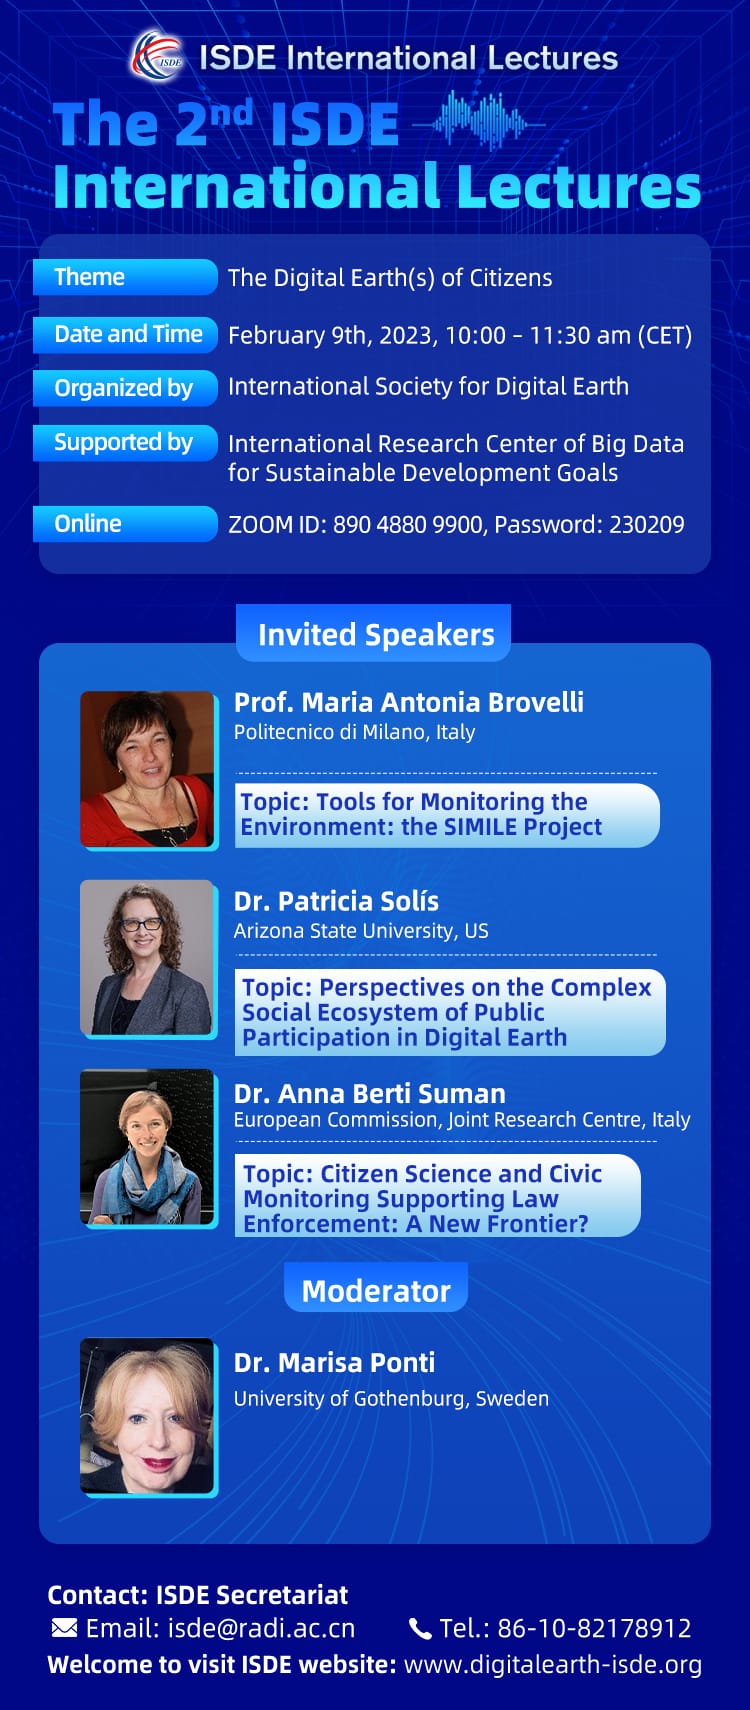 ISDE 2nd International Lectures Program